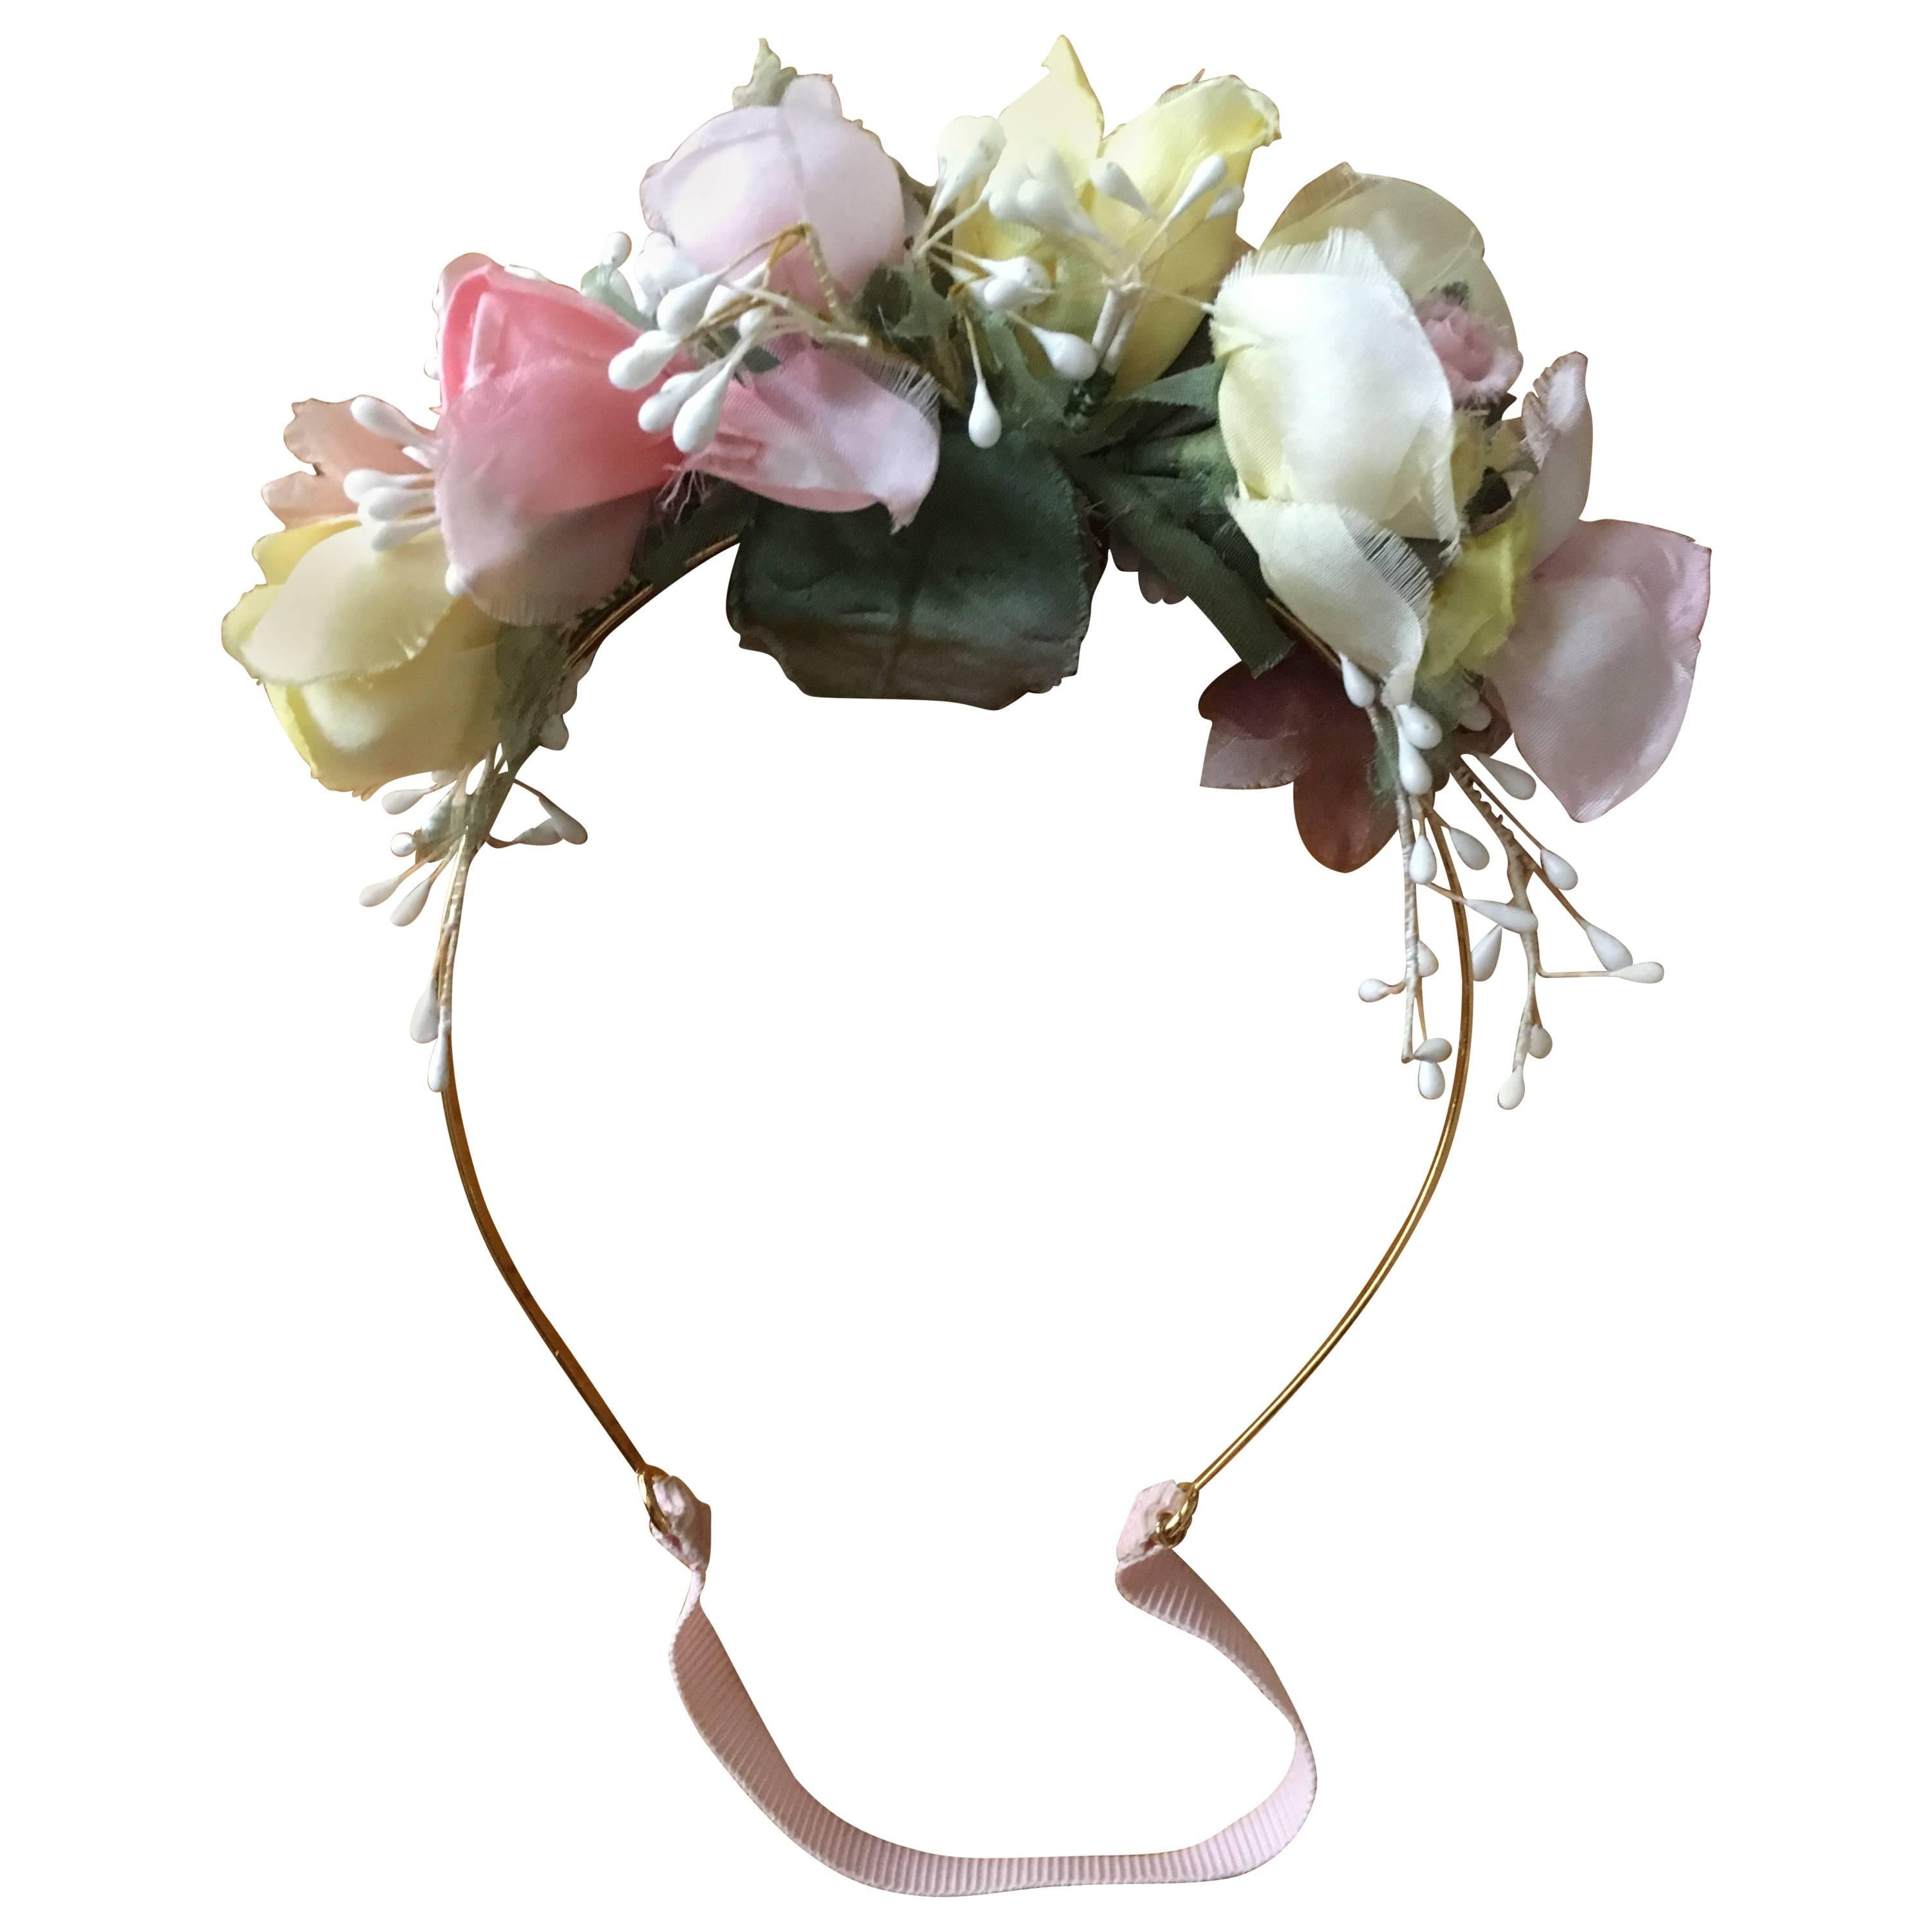 Gucci 2016 Floral Headband by Alessandro Michele New in Box For Sale